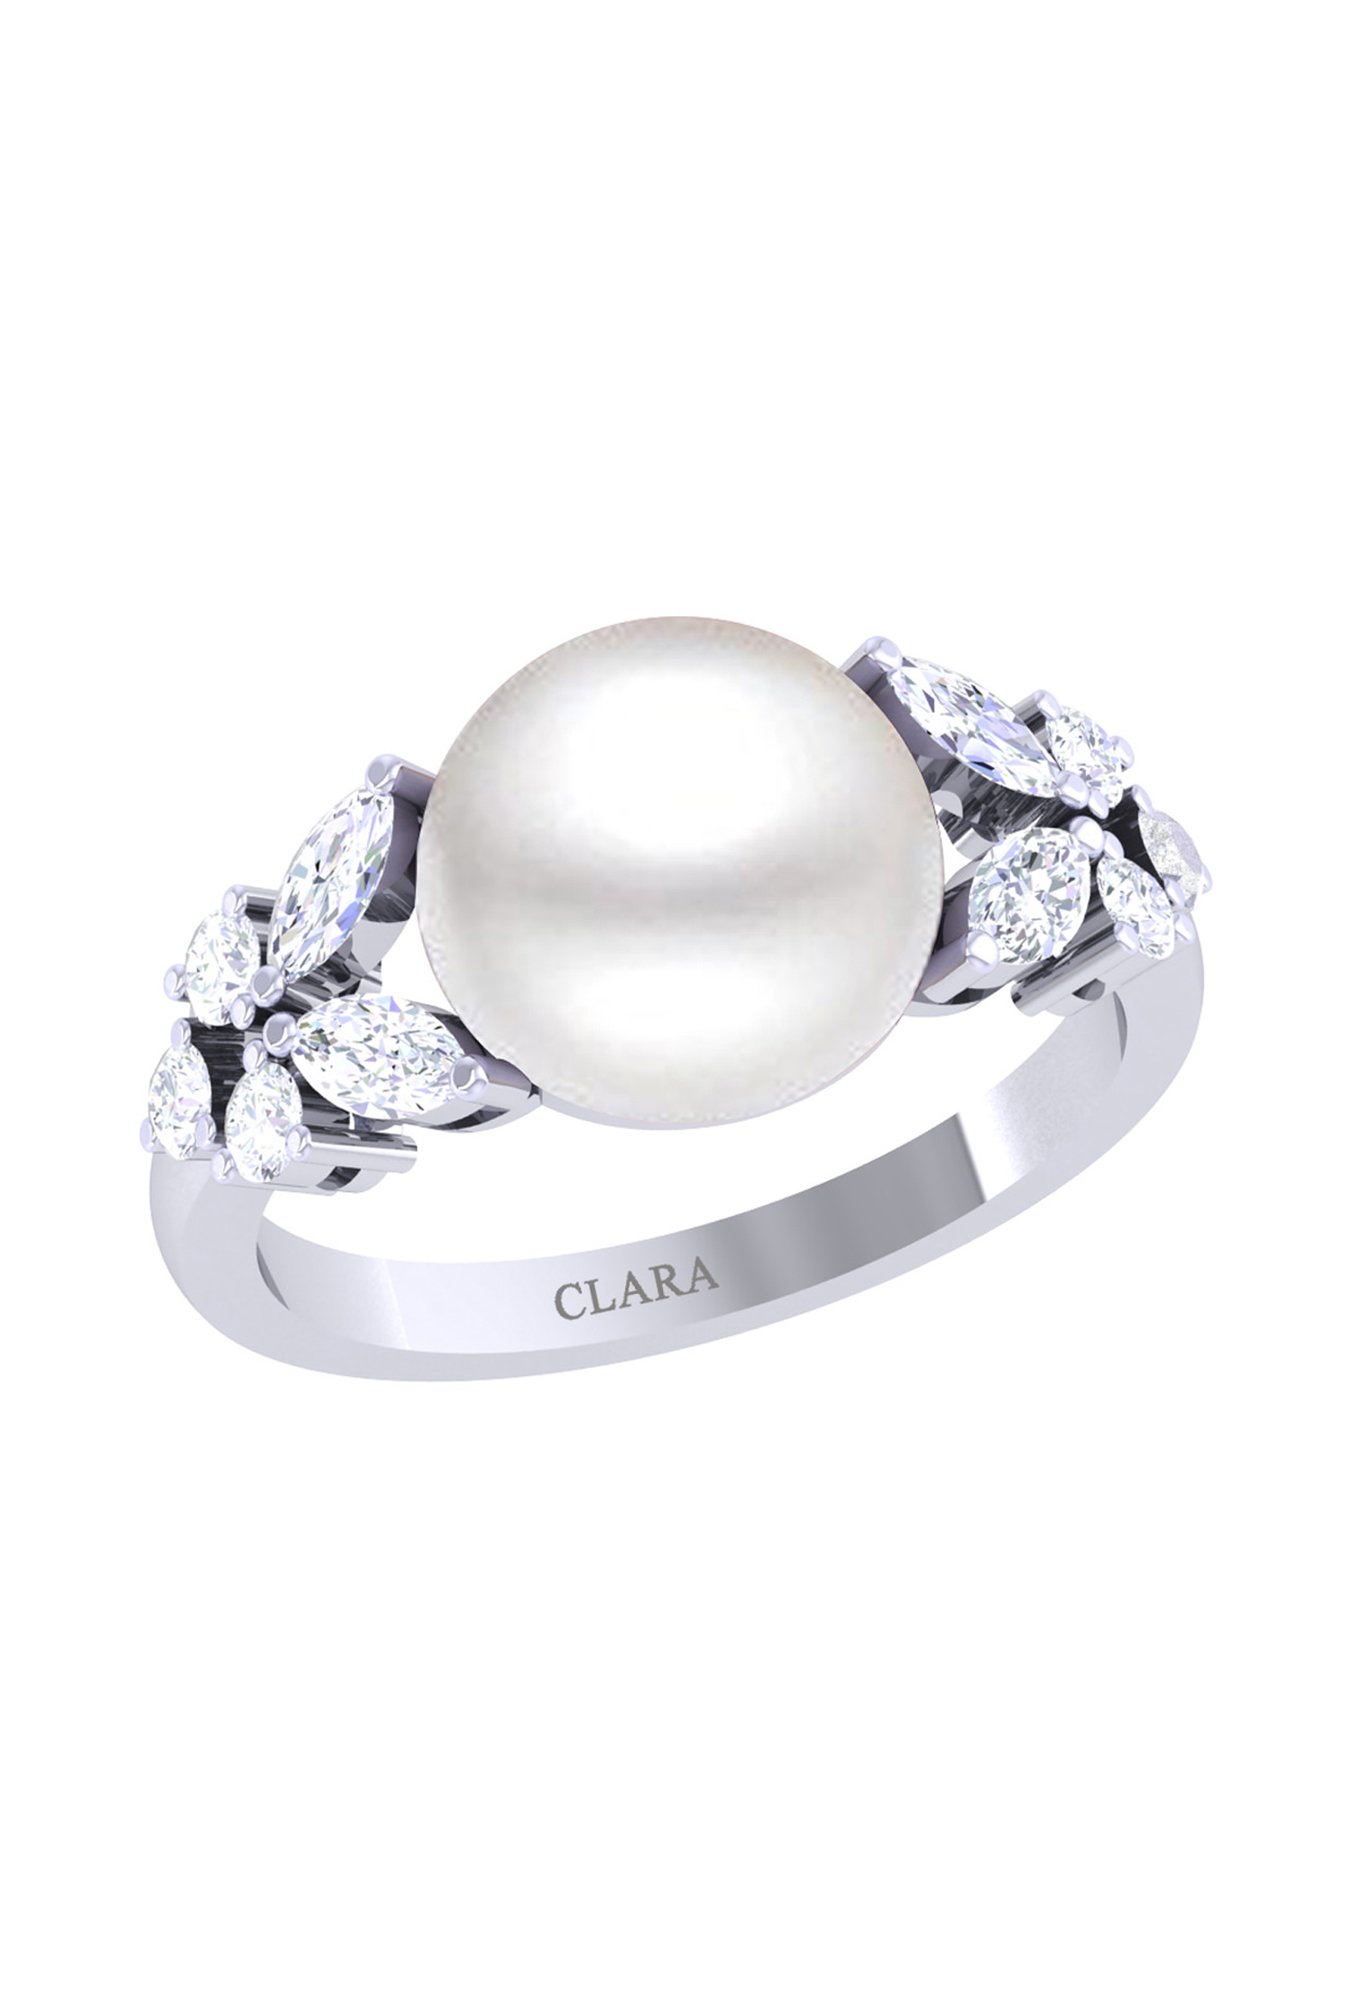 Freshwater Pearl Ring White Pearl 925 Sterling Silver Statement Ring Boho  Ring | eBay